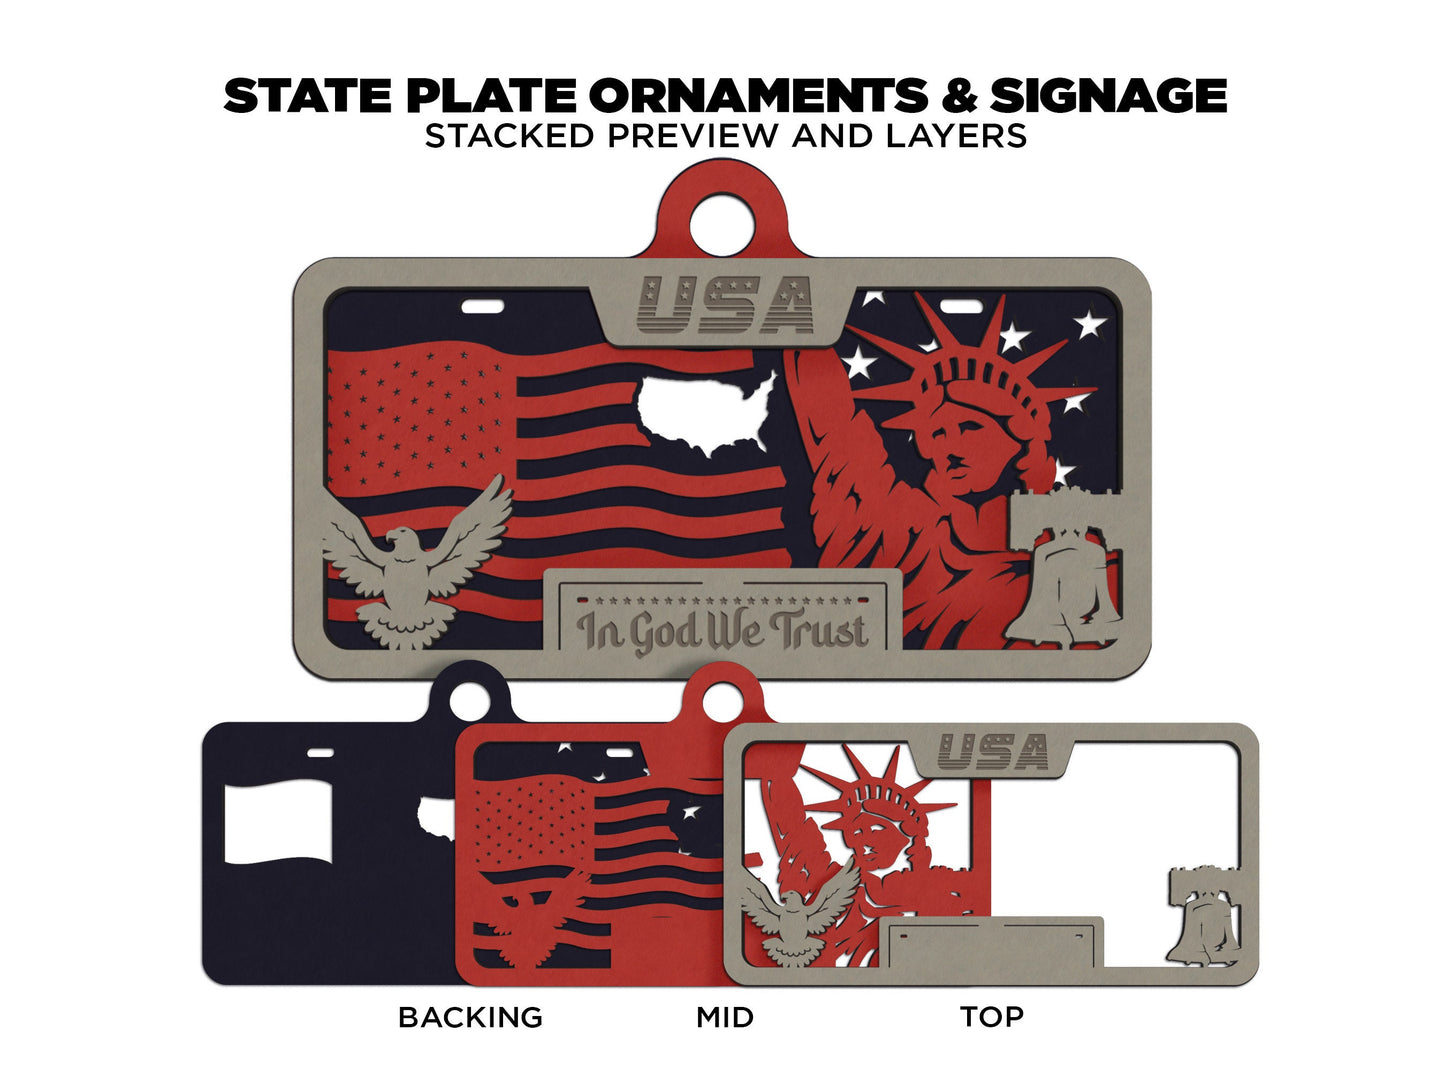 Vermont State Plate Ornament and Signage - SVG File Download - Sized for Glowforge - Laser Ready Digital Files